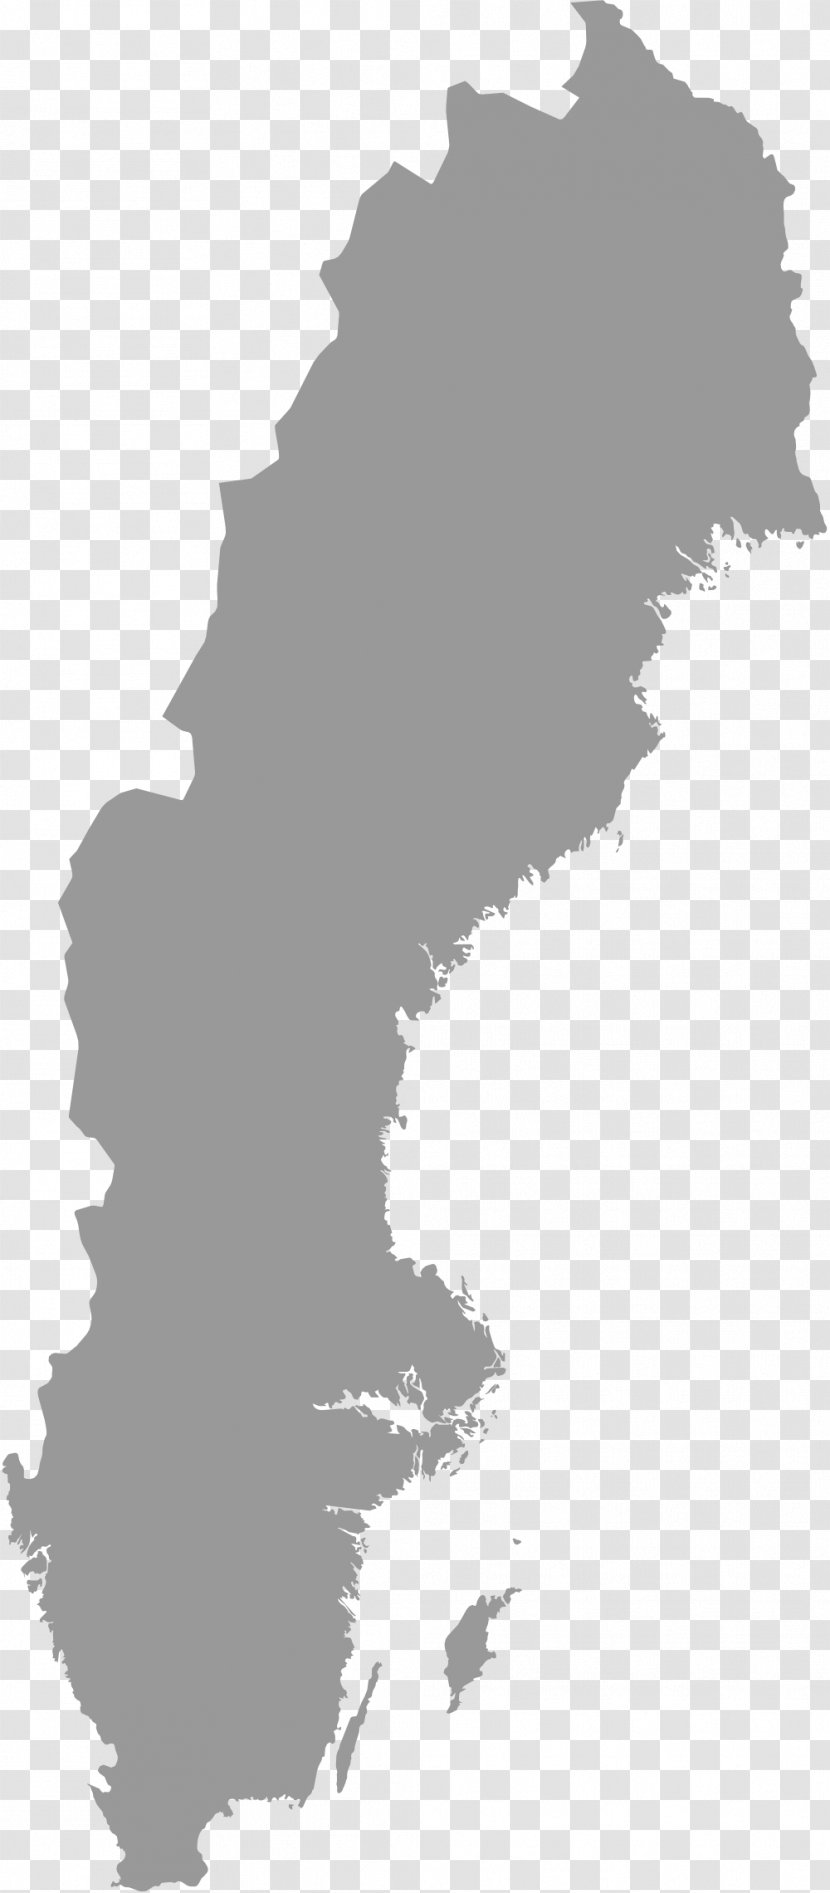 Sweden Vector Graphics Royalty-free Illustration Map - Location Transparent PNG